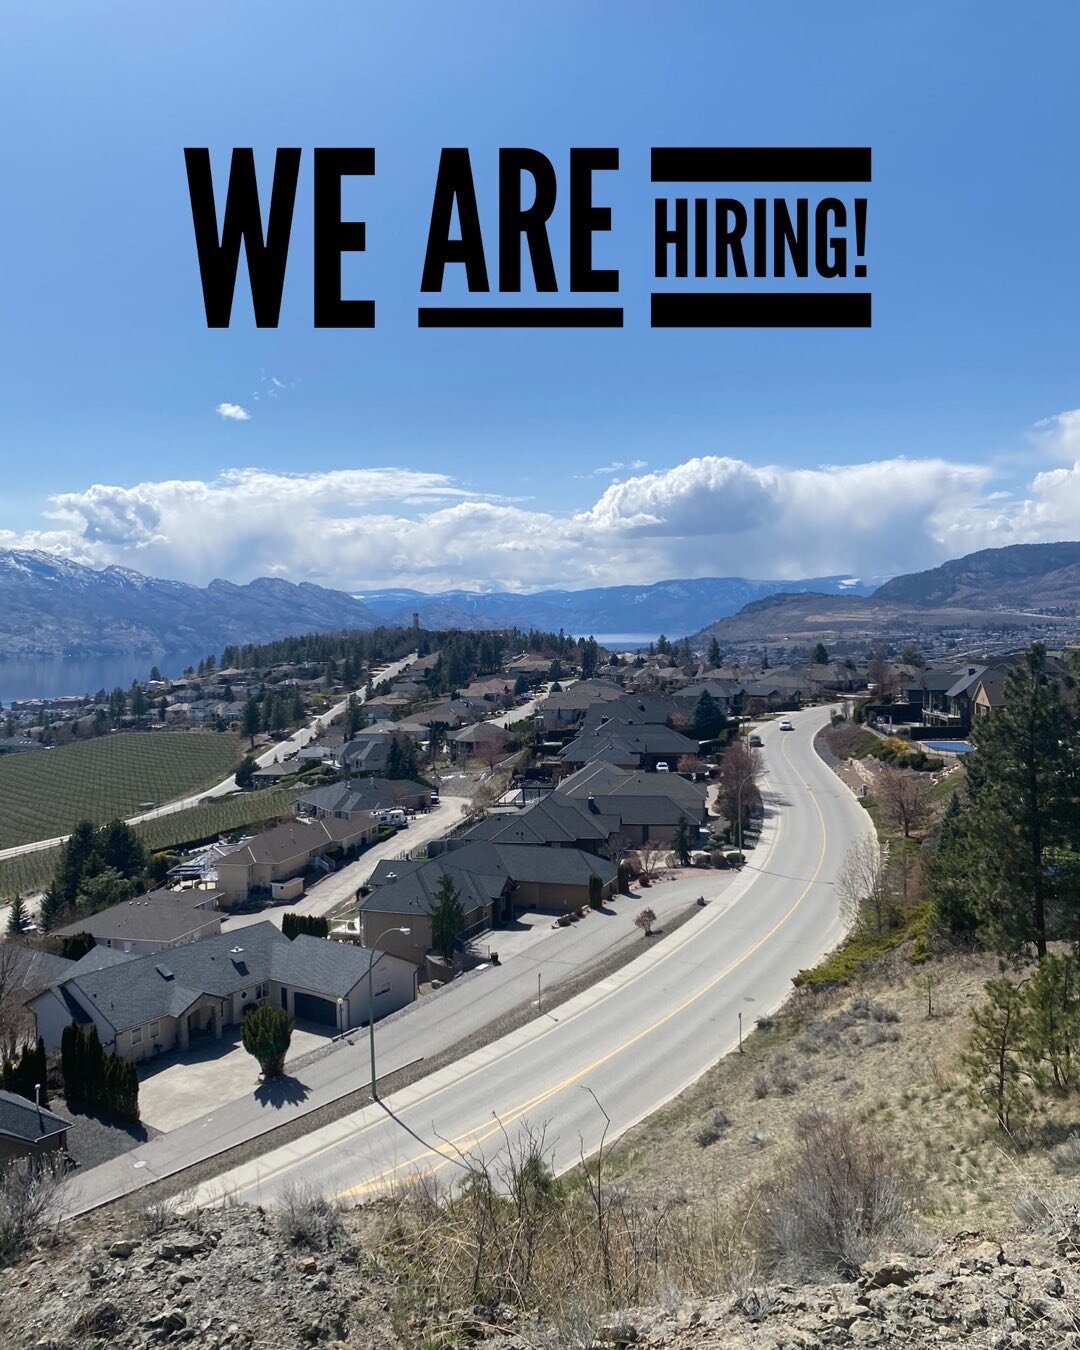 Come join our Team🤗! We are hiring for a part-time Property Maintenance Assistant.

This job offers scheduling flexibility, a variety of work and is ideal for a semi-retired individual looking to keep busy, but still have long weekends and freedom t